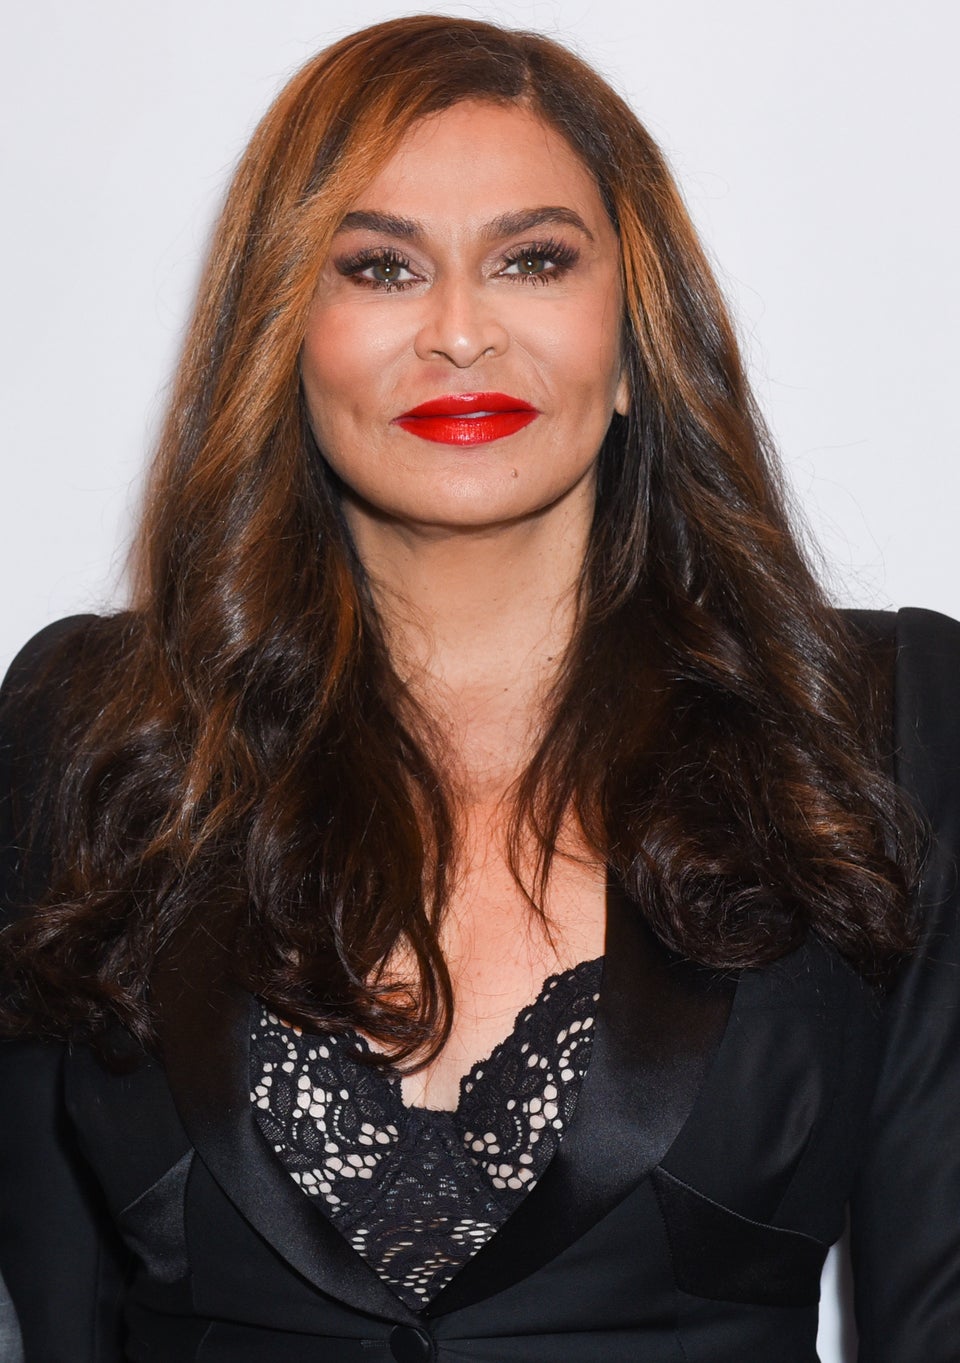 Tina Lawson Says Beyoncé Is A ‘Really Good Mom’ And She’s Excited For The Twins’ Arrival